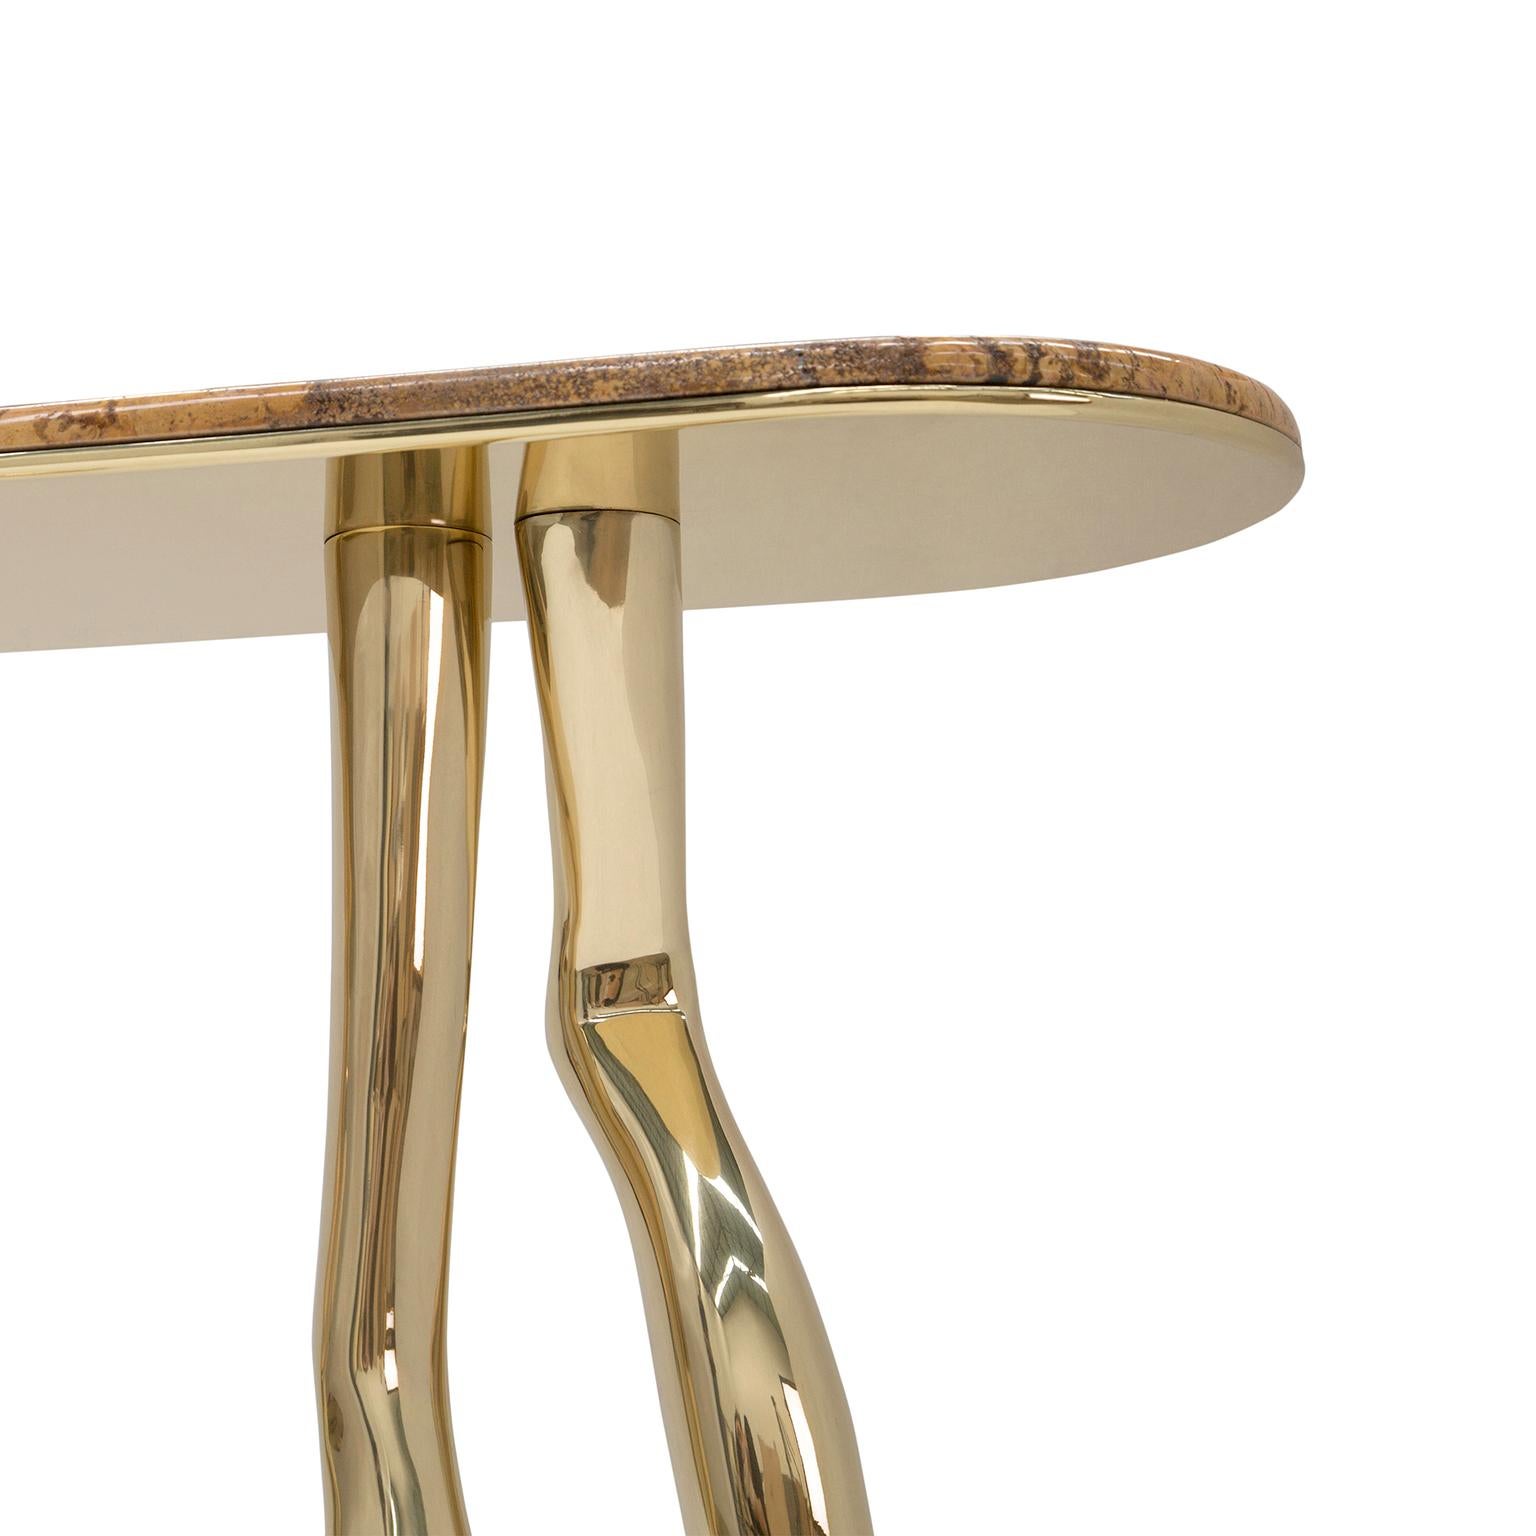 Metal Contemporary Monroe Console Table, Polished Brass, Yellow Travertine Marble For Sale